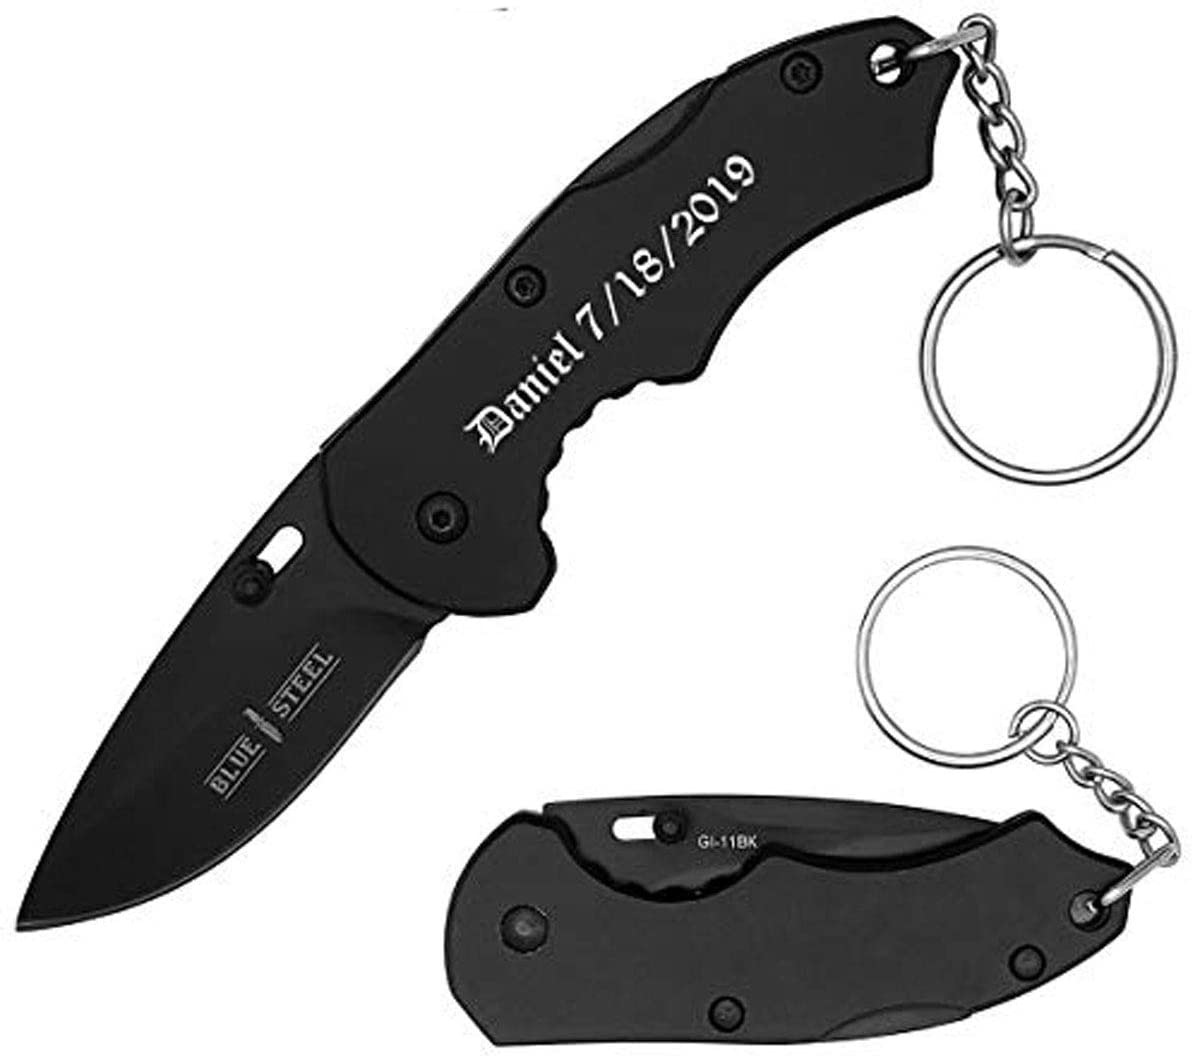 GIFTS INFINITY Personalized Laser Engraved 5″ Pocket Knife, Extreme S.S. Folding Knife with Fine Edge Blade and Survival